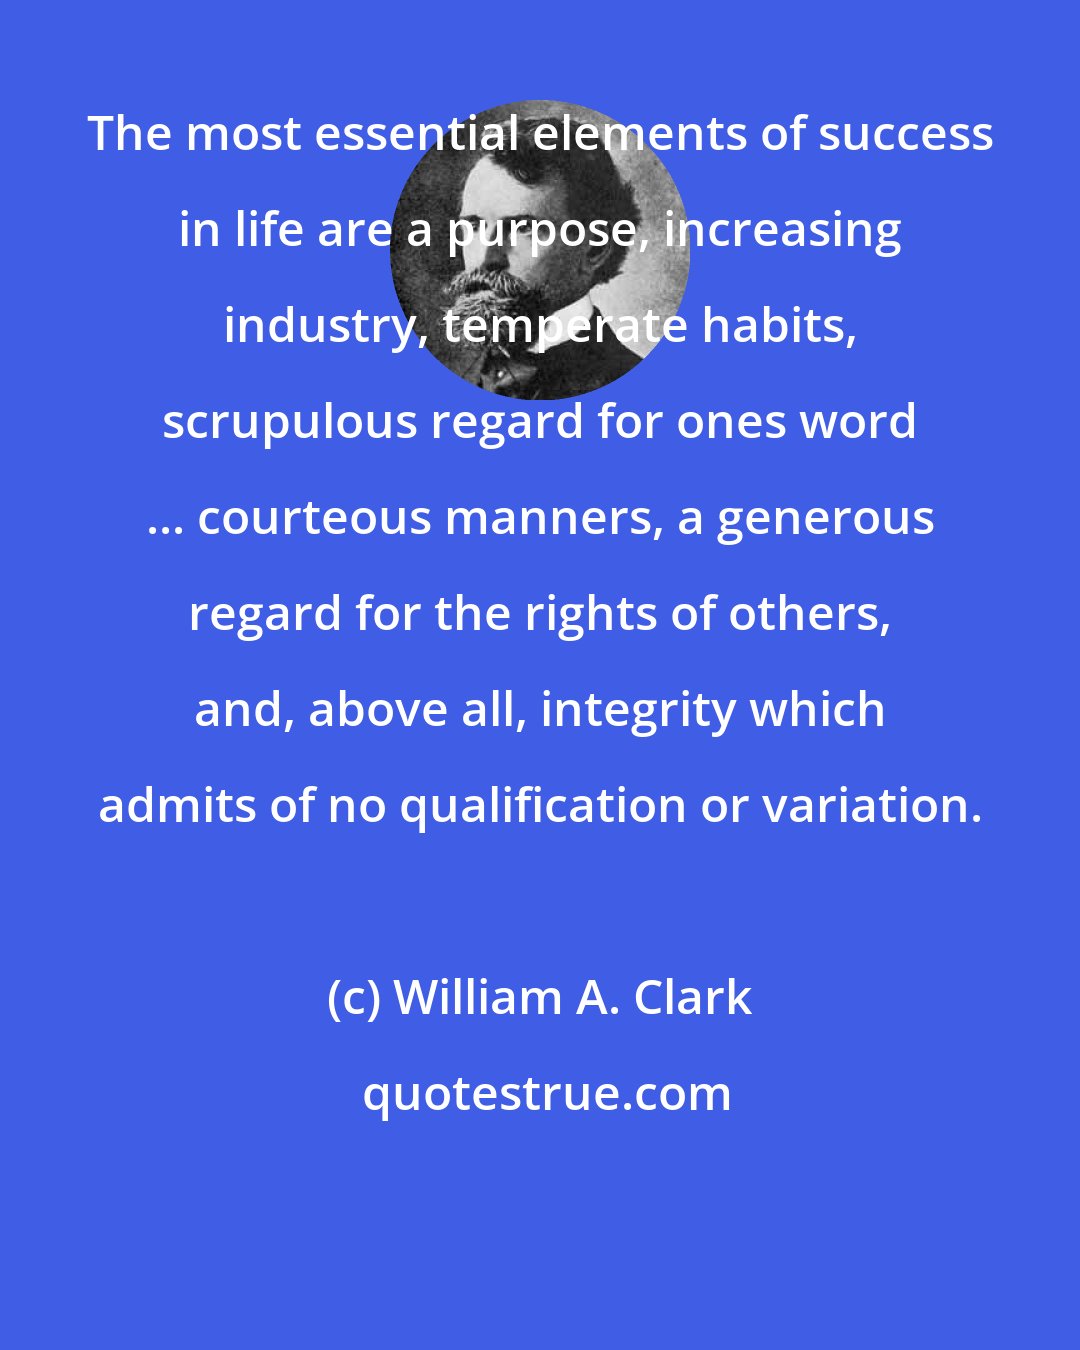 William A. Clark: The most essential elements of success in life are a purpose, increasing industry, temperate habits, scrupulous regard for ones word ... courteous manners, a generous regard for the rights of others, and, above all, integrity which admits of no qualification or variation.